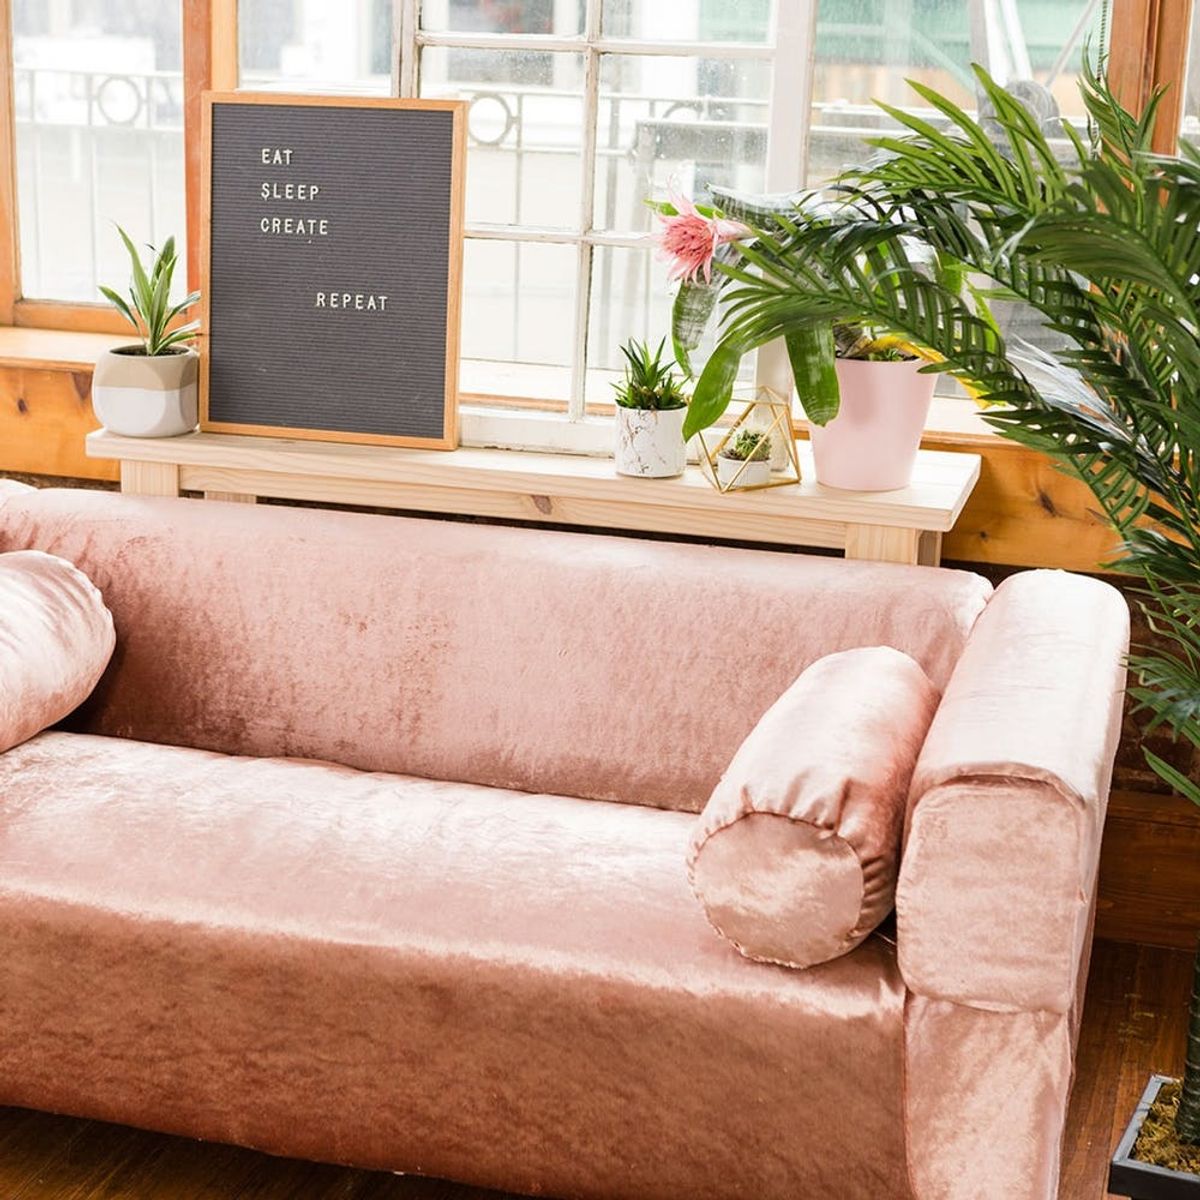 Upholster This $250 IKEA Couch into a $2800 Anthropologie Couch